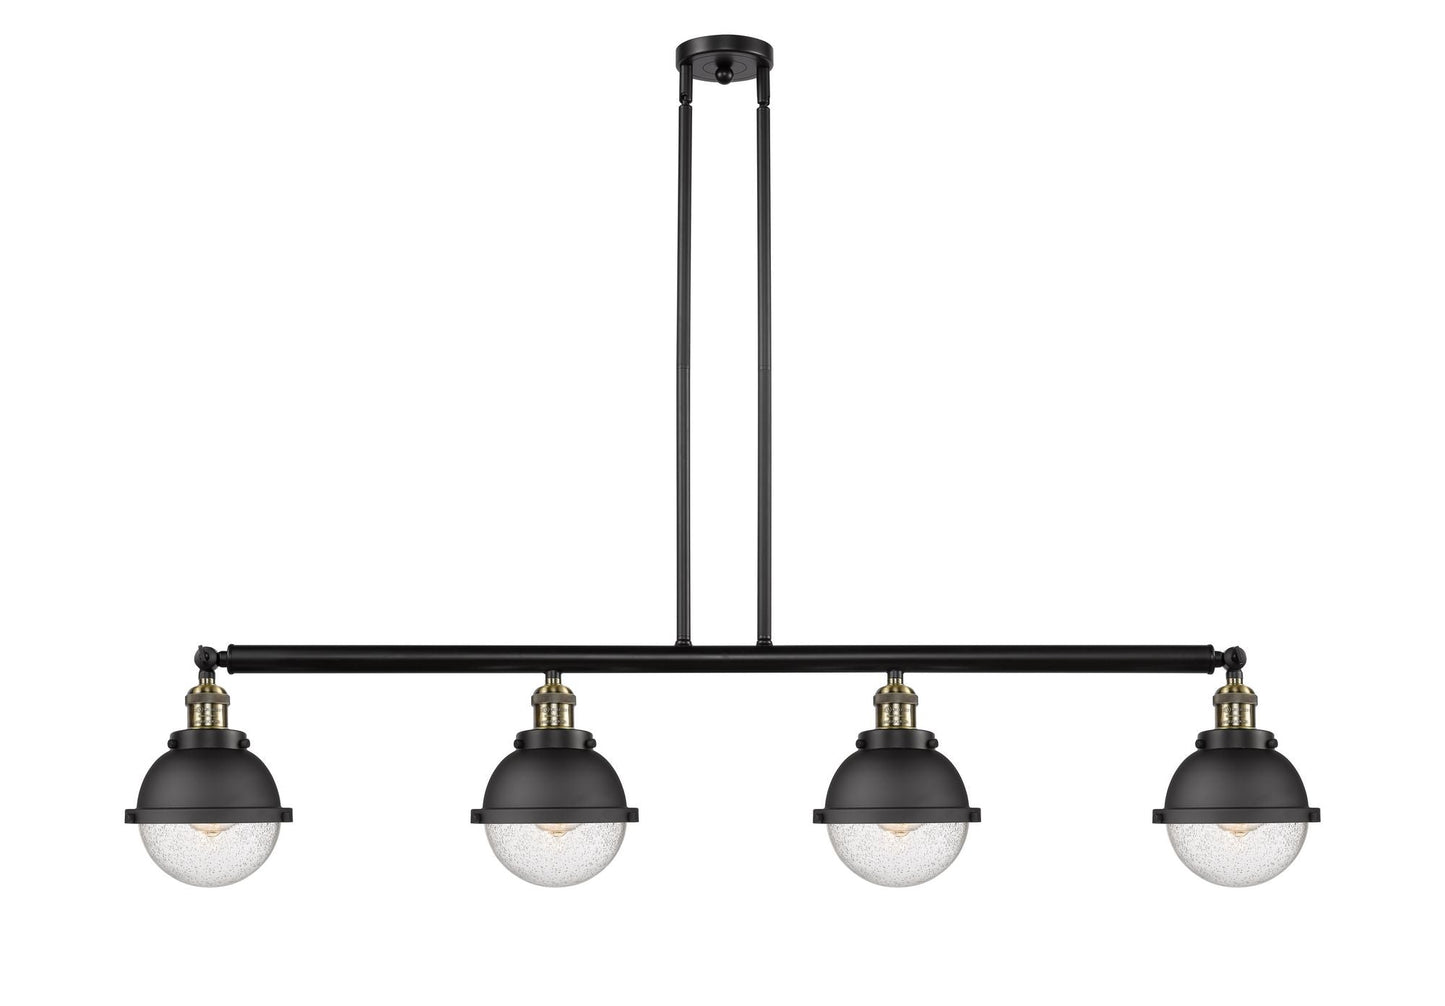 214-BAB-HFS-64-BK 4-Light 51.875" Matte Black Island Light - Seedy Hampden Glass - LED Bulb - Dimmensions: 51.875 x 7.25 x 10.5<br>Minimum Height : 19.5<br>Maximum Height : 43.5 - Sloped Ceiling Compatible: Yes